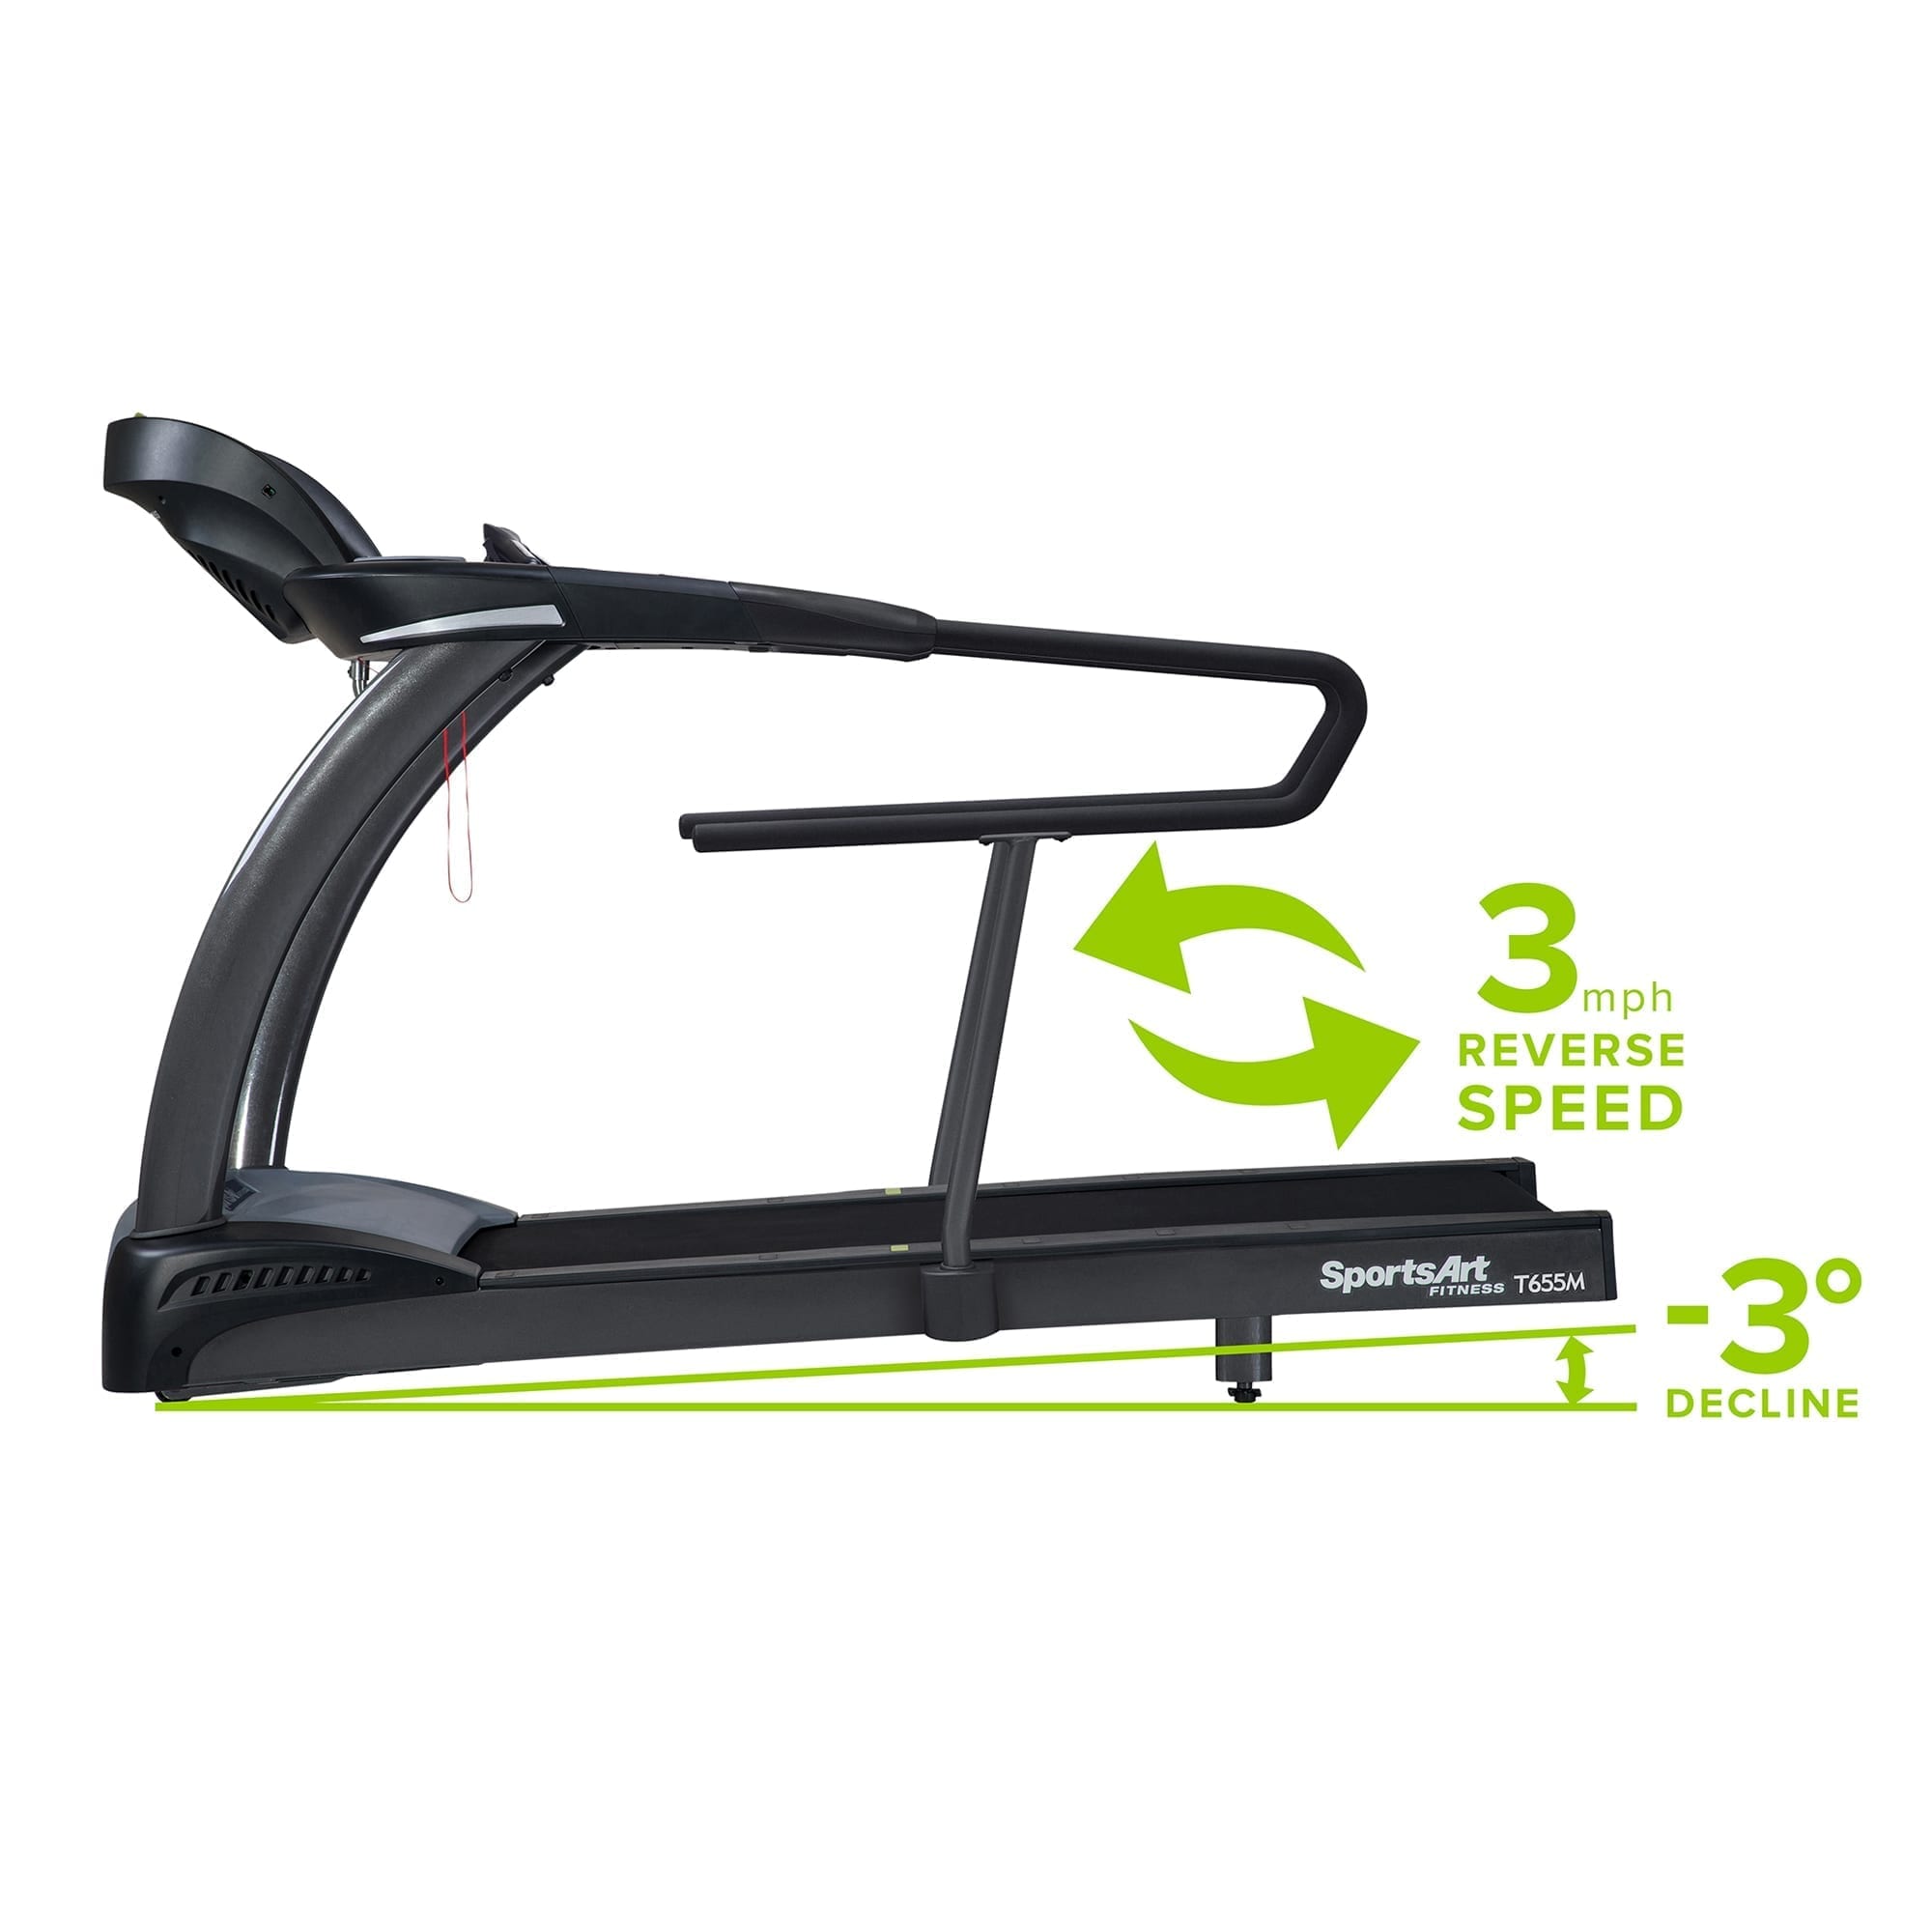 SportsArts Medical Treadmill T655MS with 3MPH Reverse Speed and -3 degree decline key features graphics 